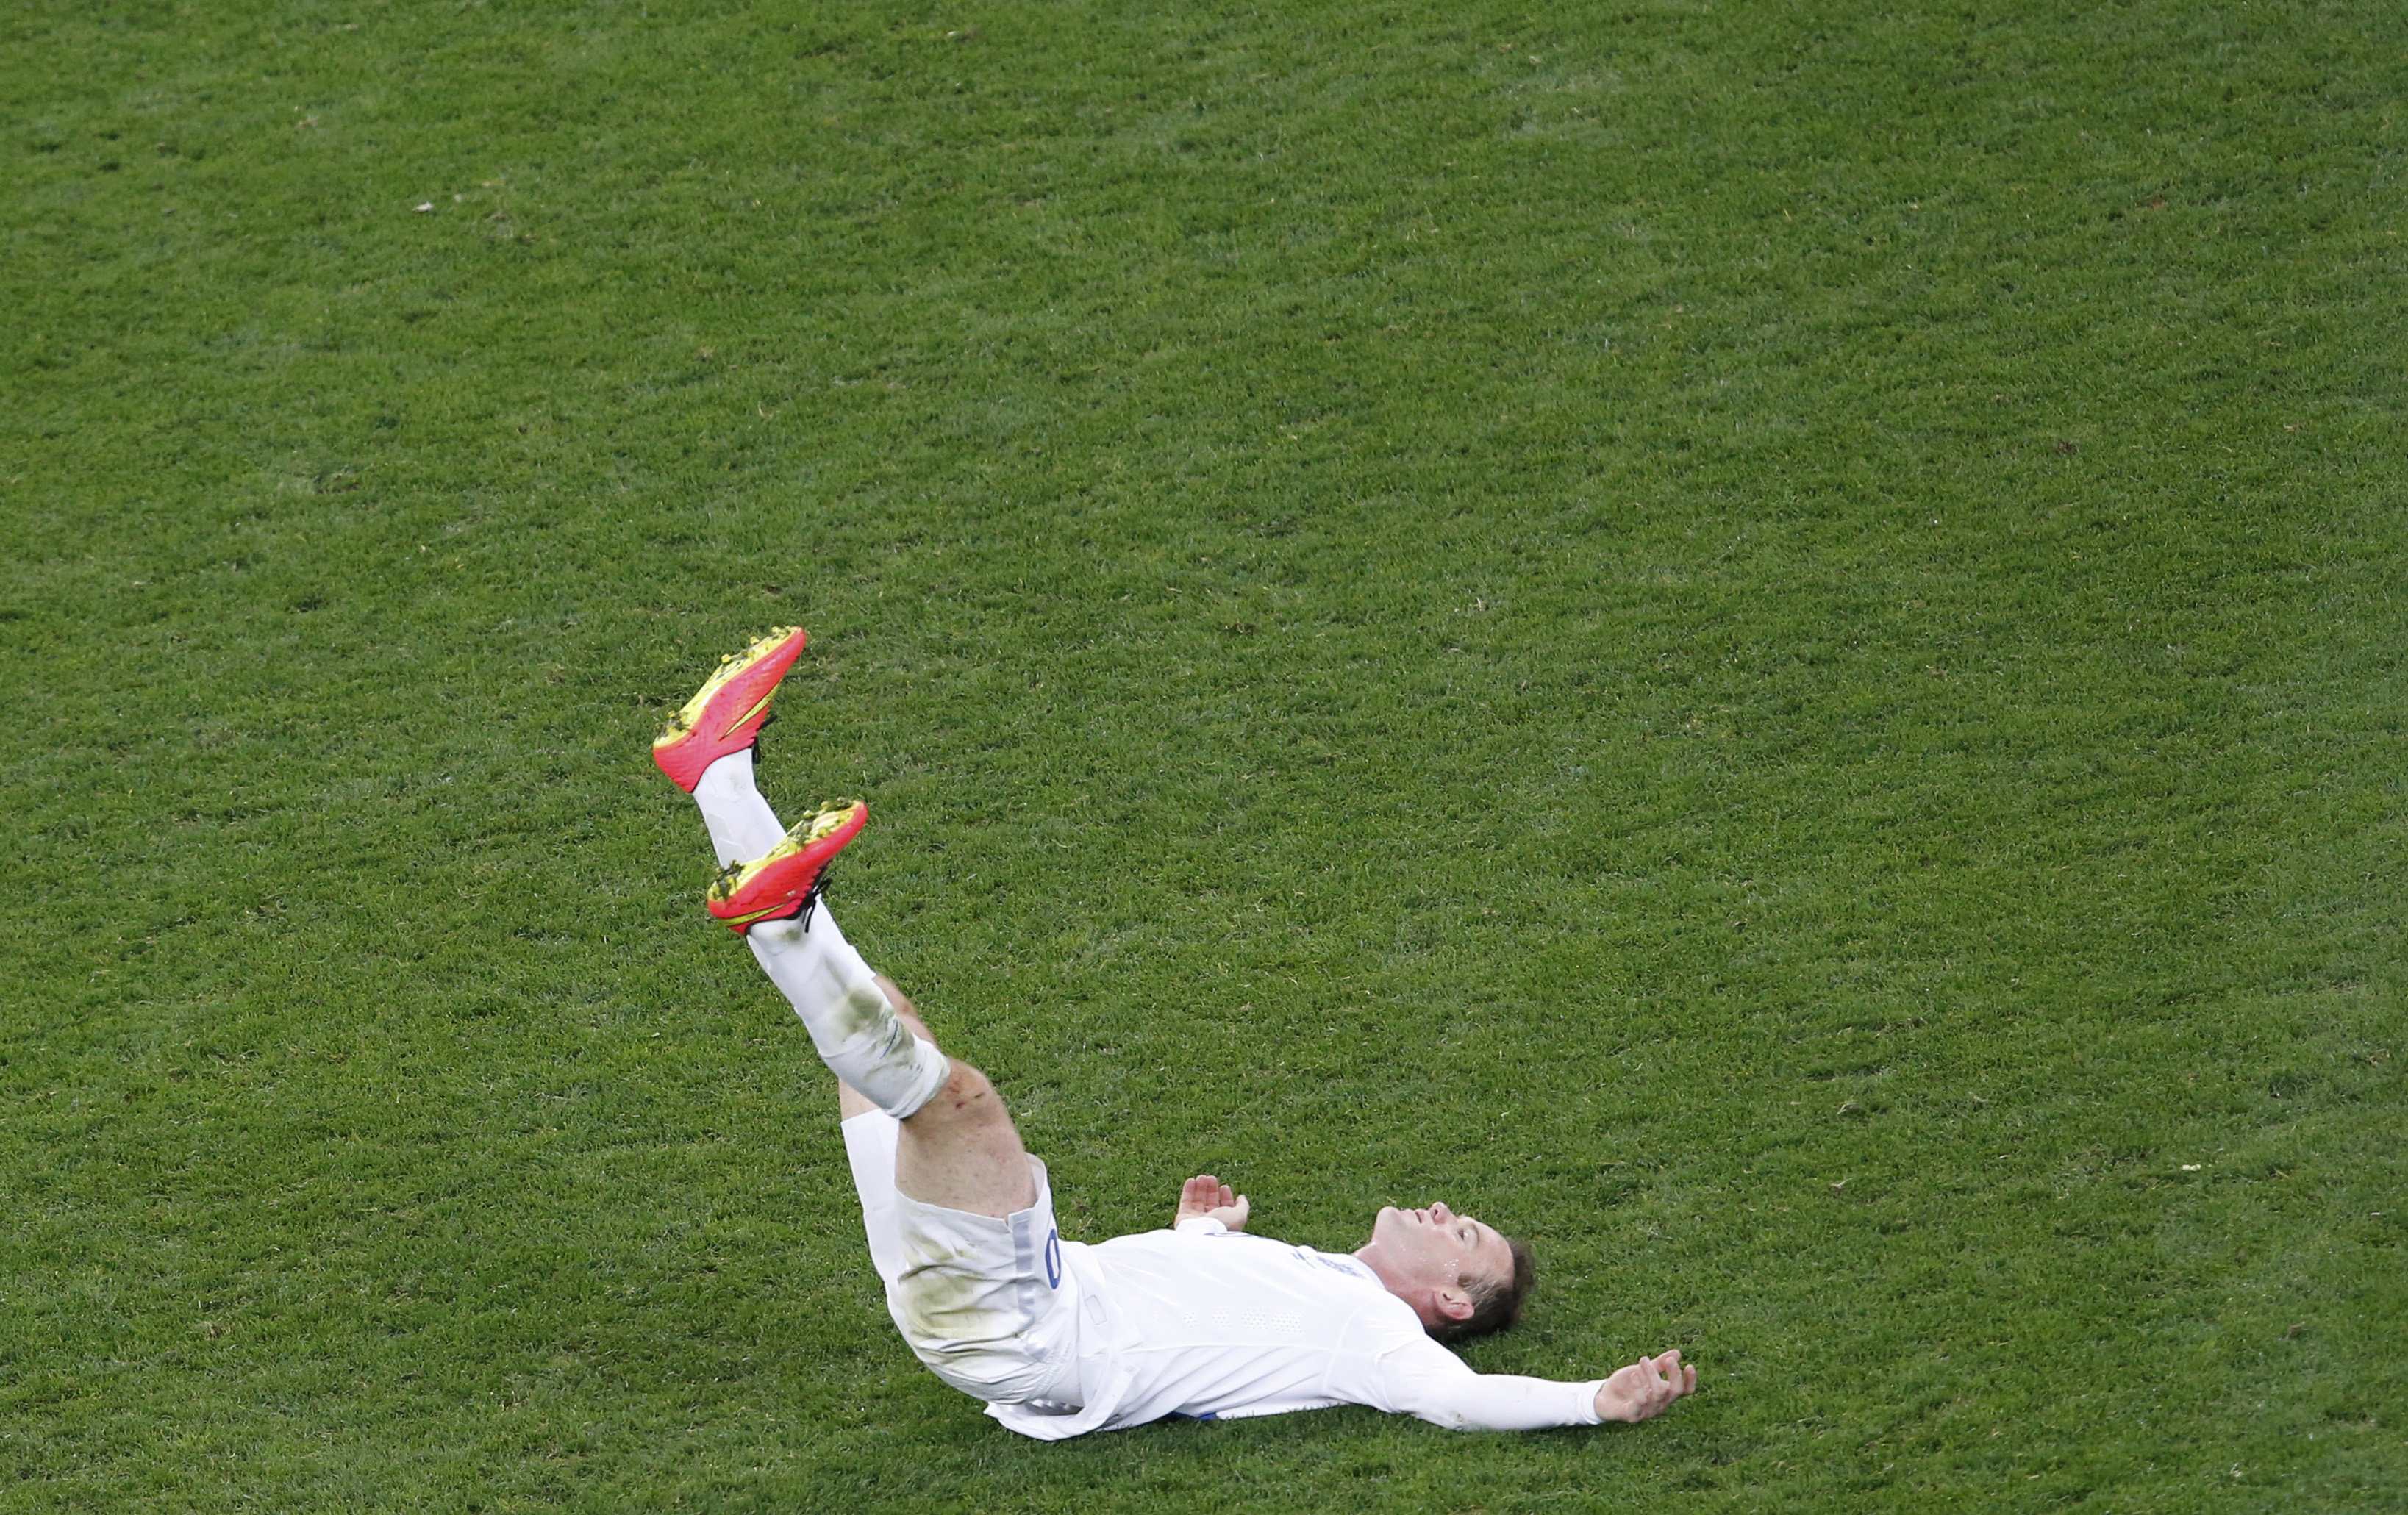 England's Wayne Rooney reacts to missing a goal during their 2014 World Cup Group D soccer match against Uruguay at the Corinthians arena in Sao Paulo June 19, 2014.   REUTERS/Paulo Whitaker (BRAZIL  - Tags: SOCCER SPORT WORLD CUP)  